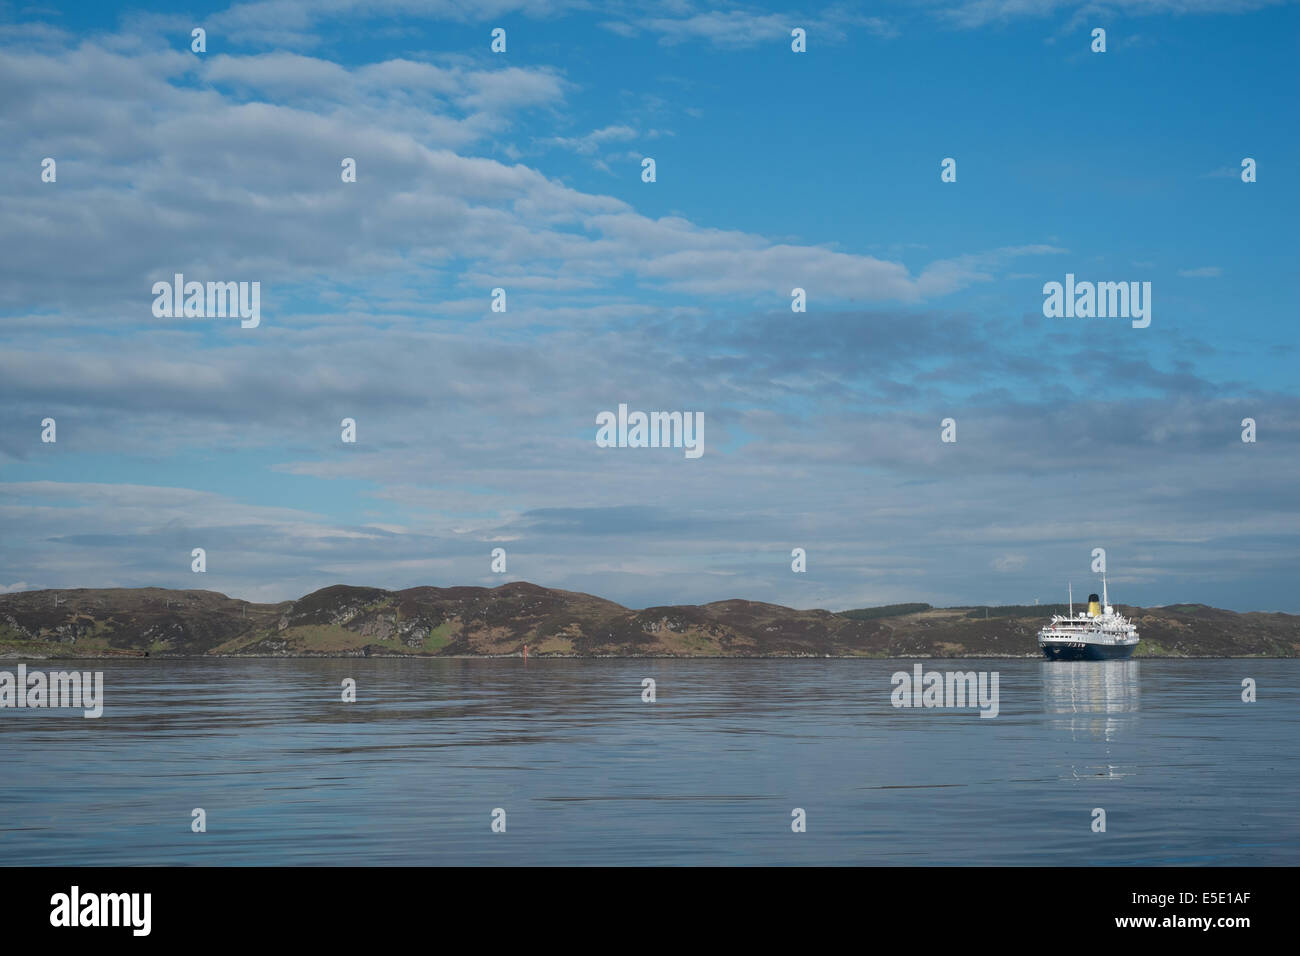 Cruise ship moored, Stornoway harbour, Isle of Lewis, Outer Hebrides on bright blue sea with blue skies Stock Photo